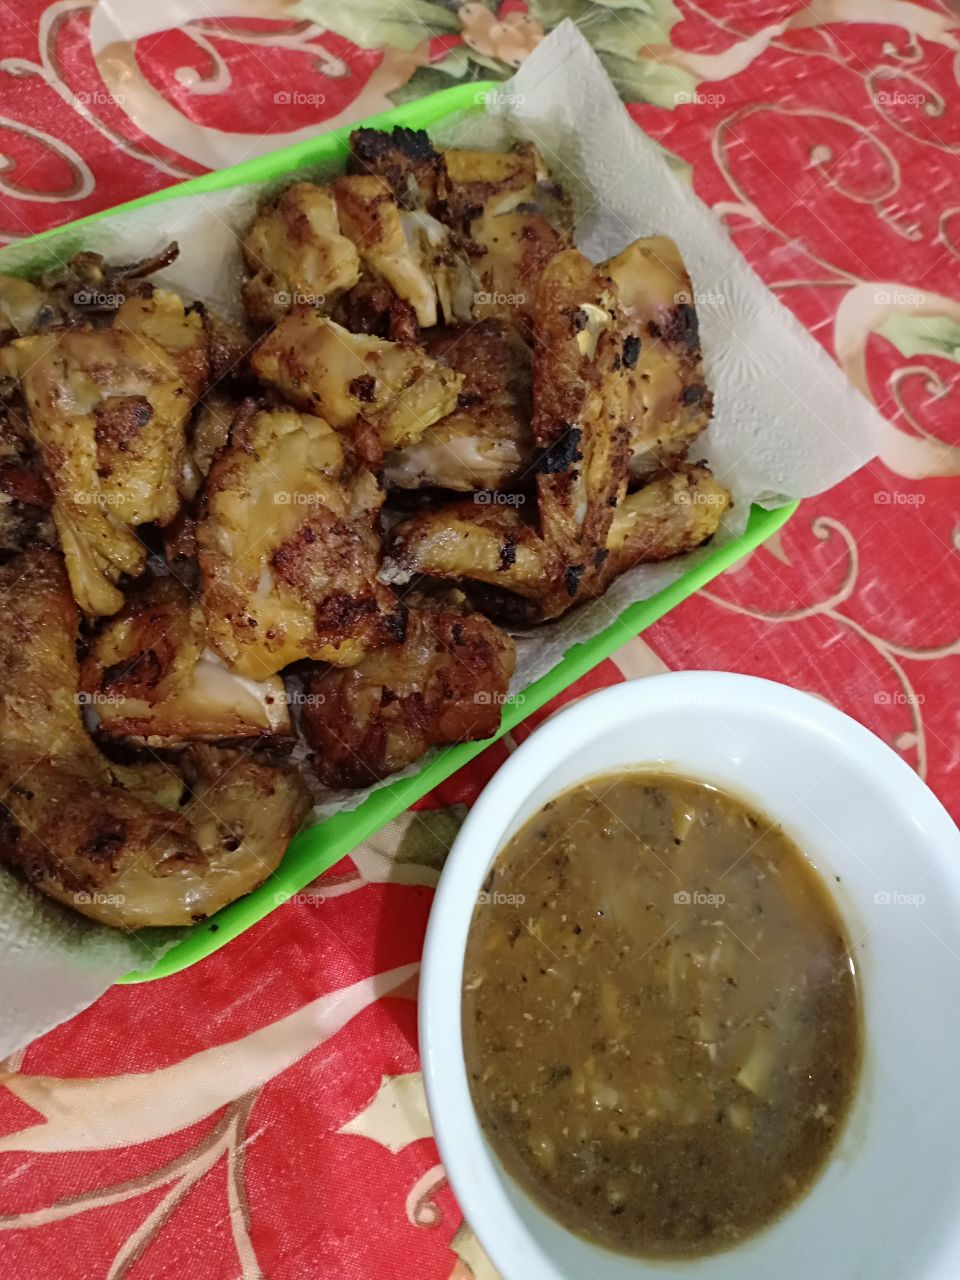 Spiced chicken in basik and rosemary